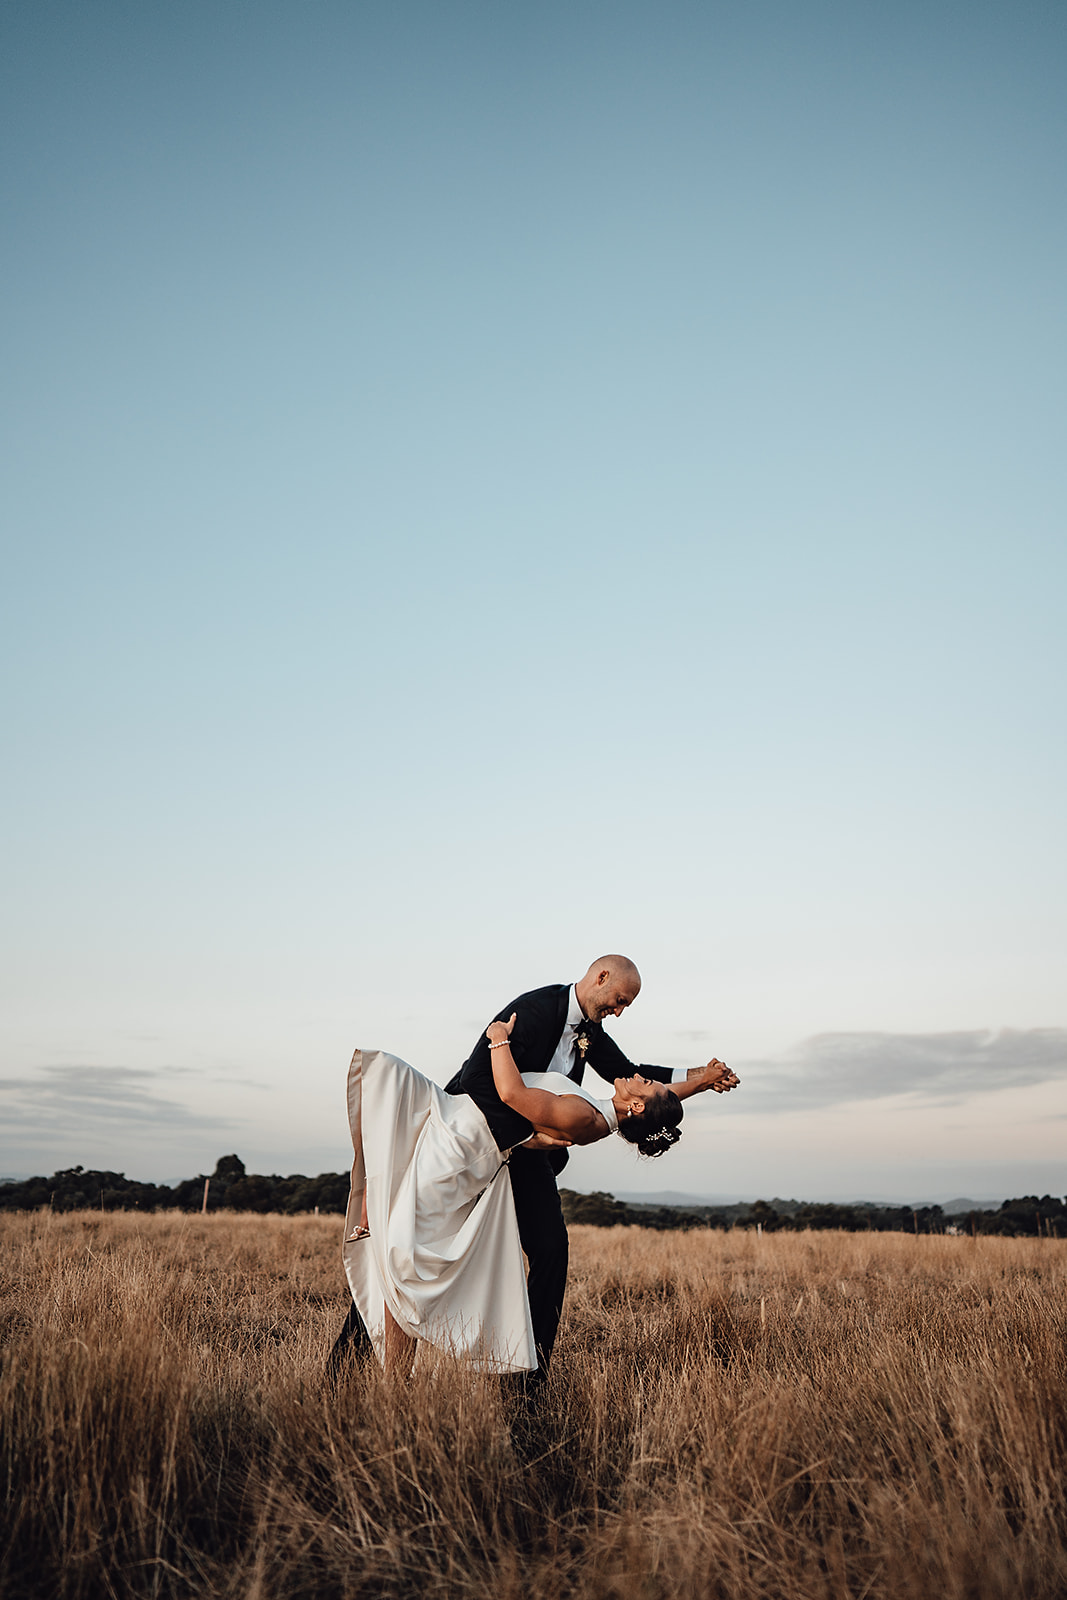 Dancing on your wedding day during sunset could not be better. This was captured at The farm in Yarra Valley by Michael 